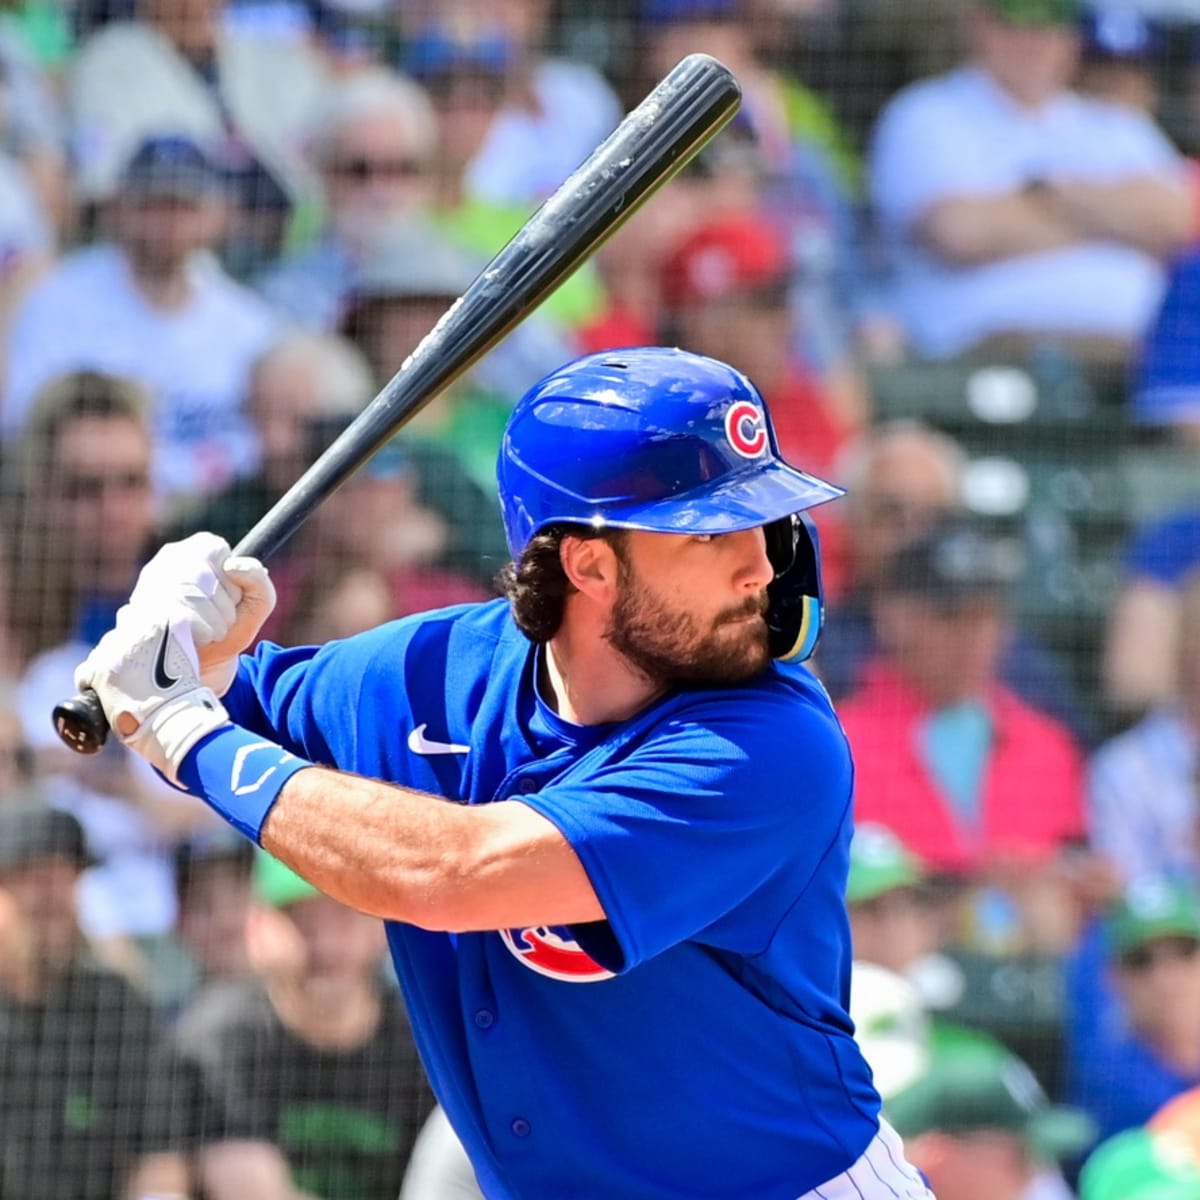 Chicago Cubs lineup vs. Twins: Christopher Morel at 2B, Eric Hosmer at DH